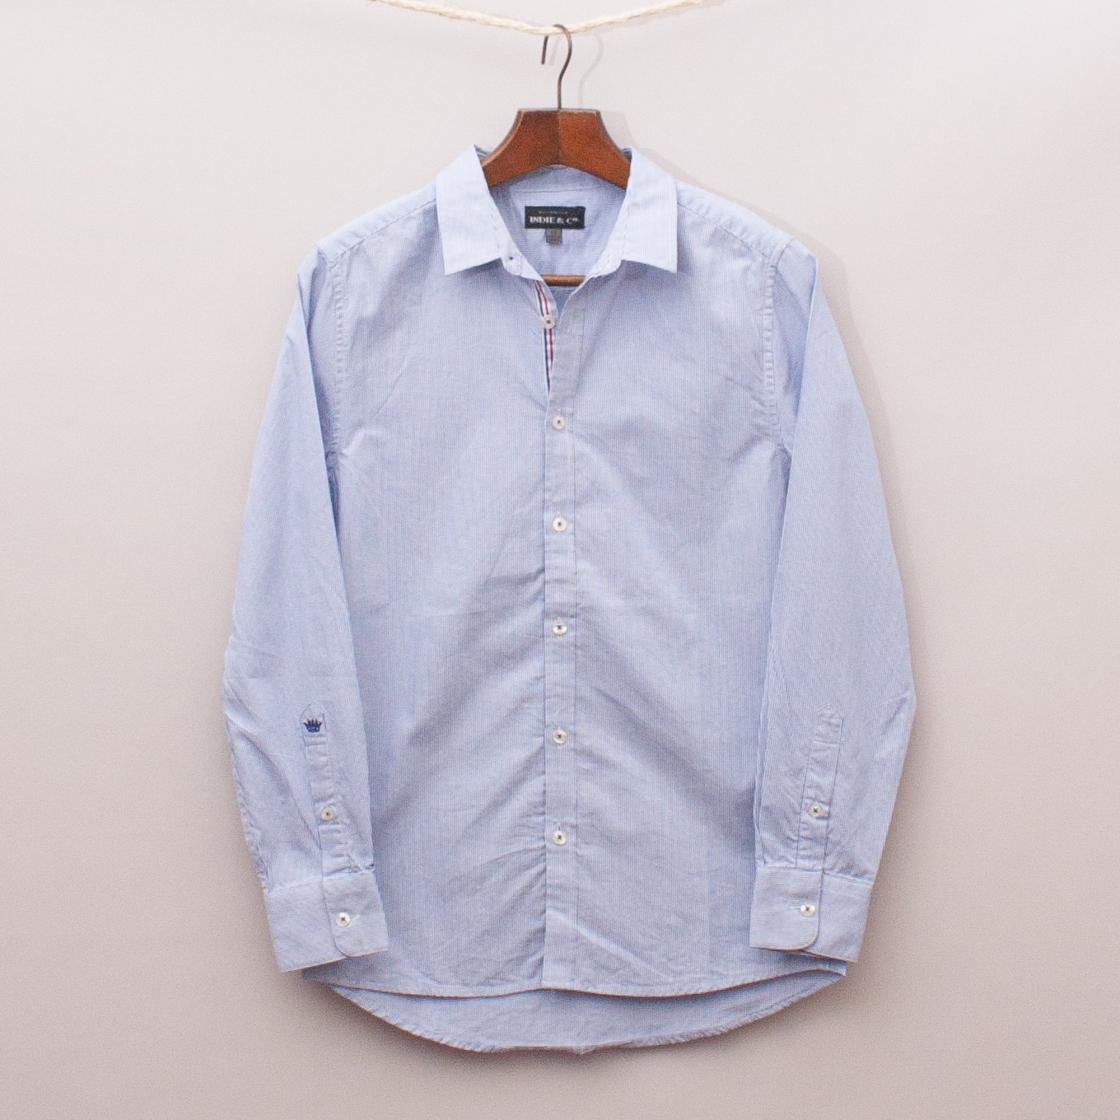 Indie & Co. Check Shirt